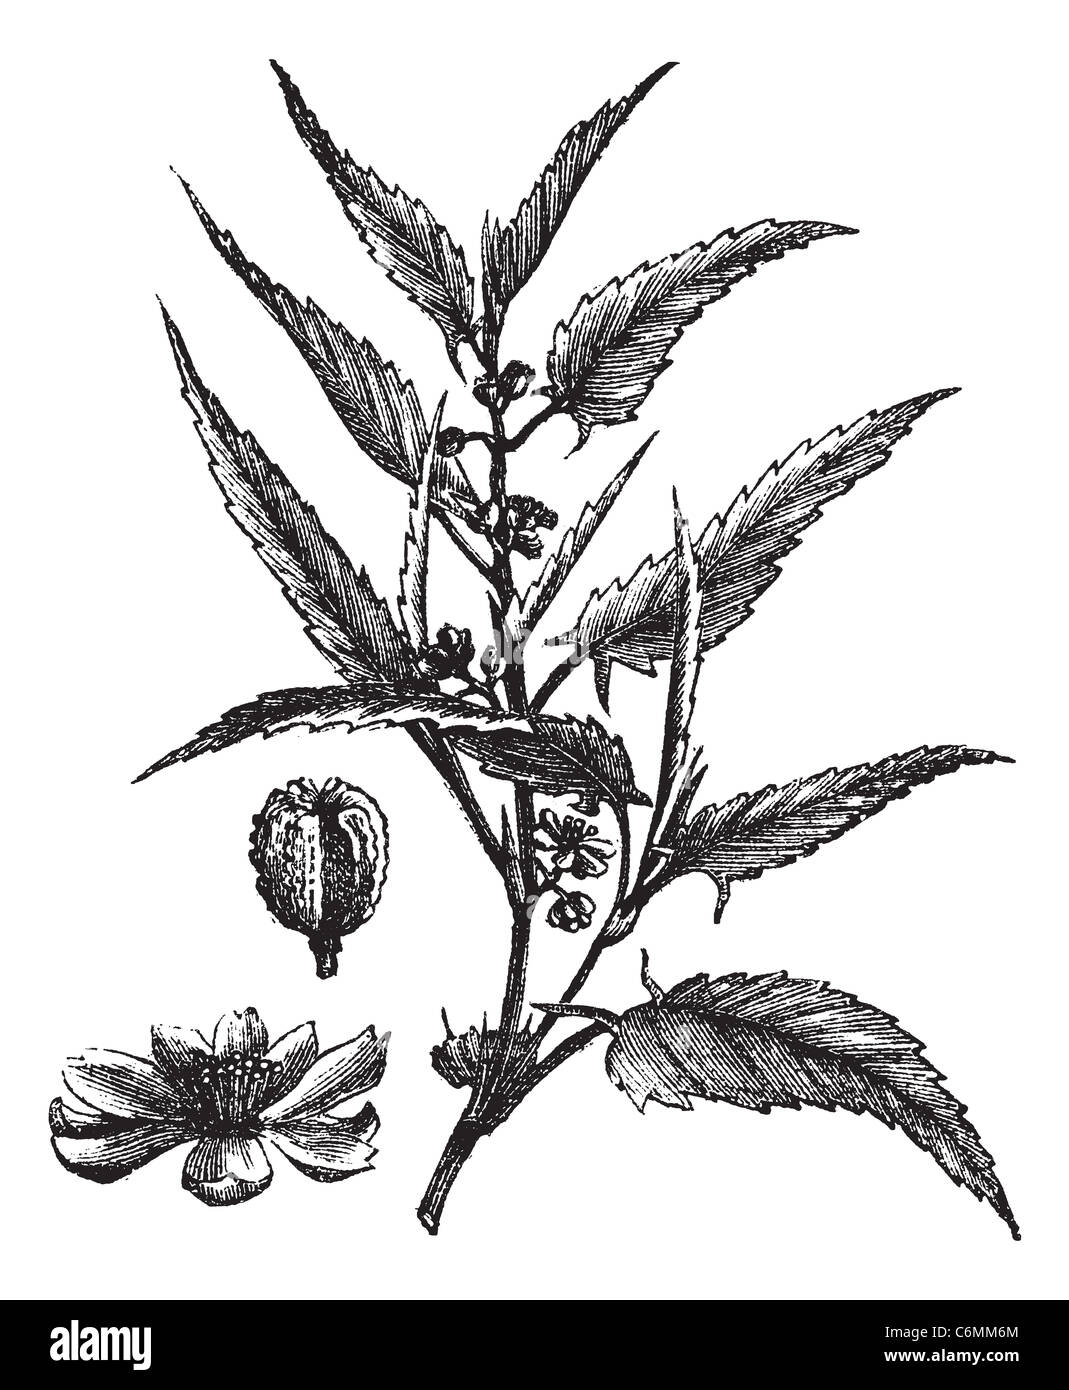 Jute or Corchorus capsularis or Corchorus olitorius, vintage engraving. Old engraved illustration of a Jute showing flowers. Stock Photo